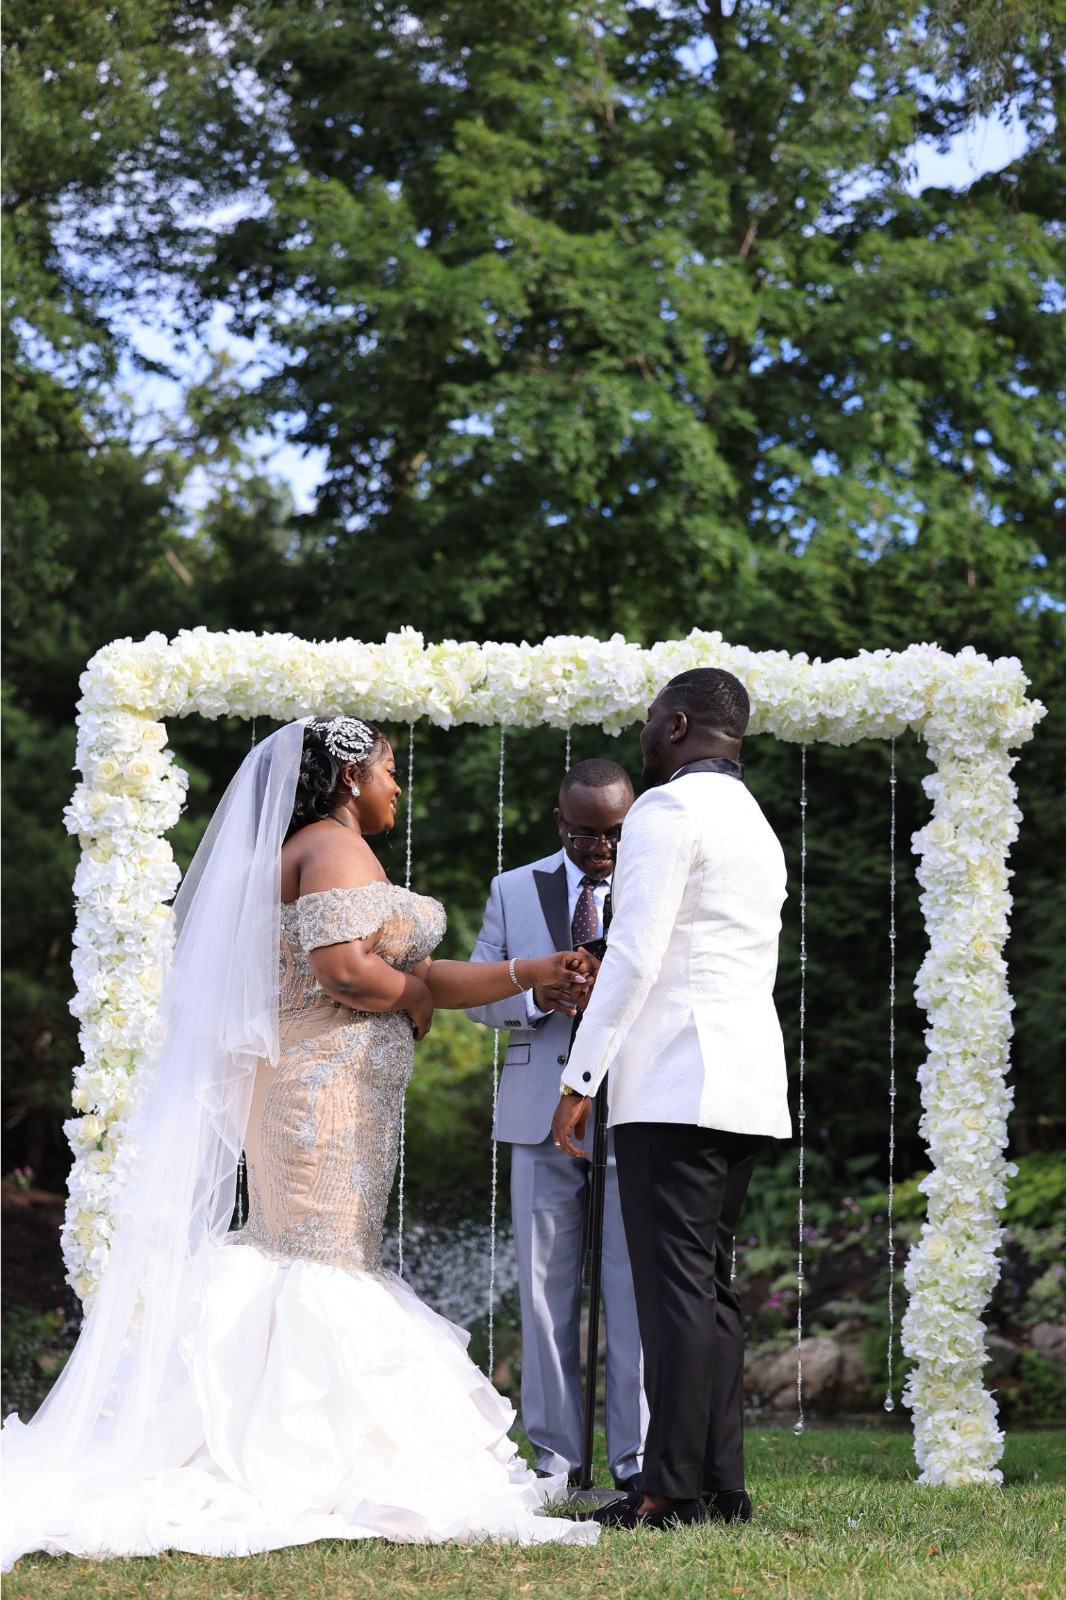 A Bride and groom standing with reception gate with photographer.